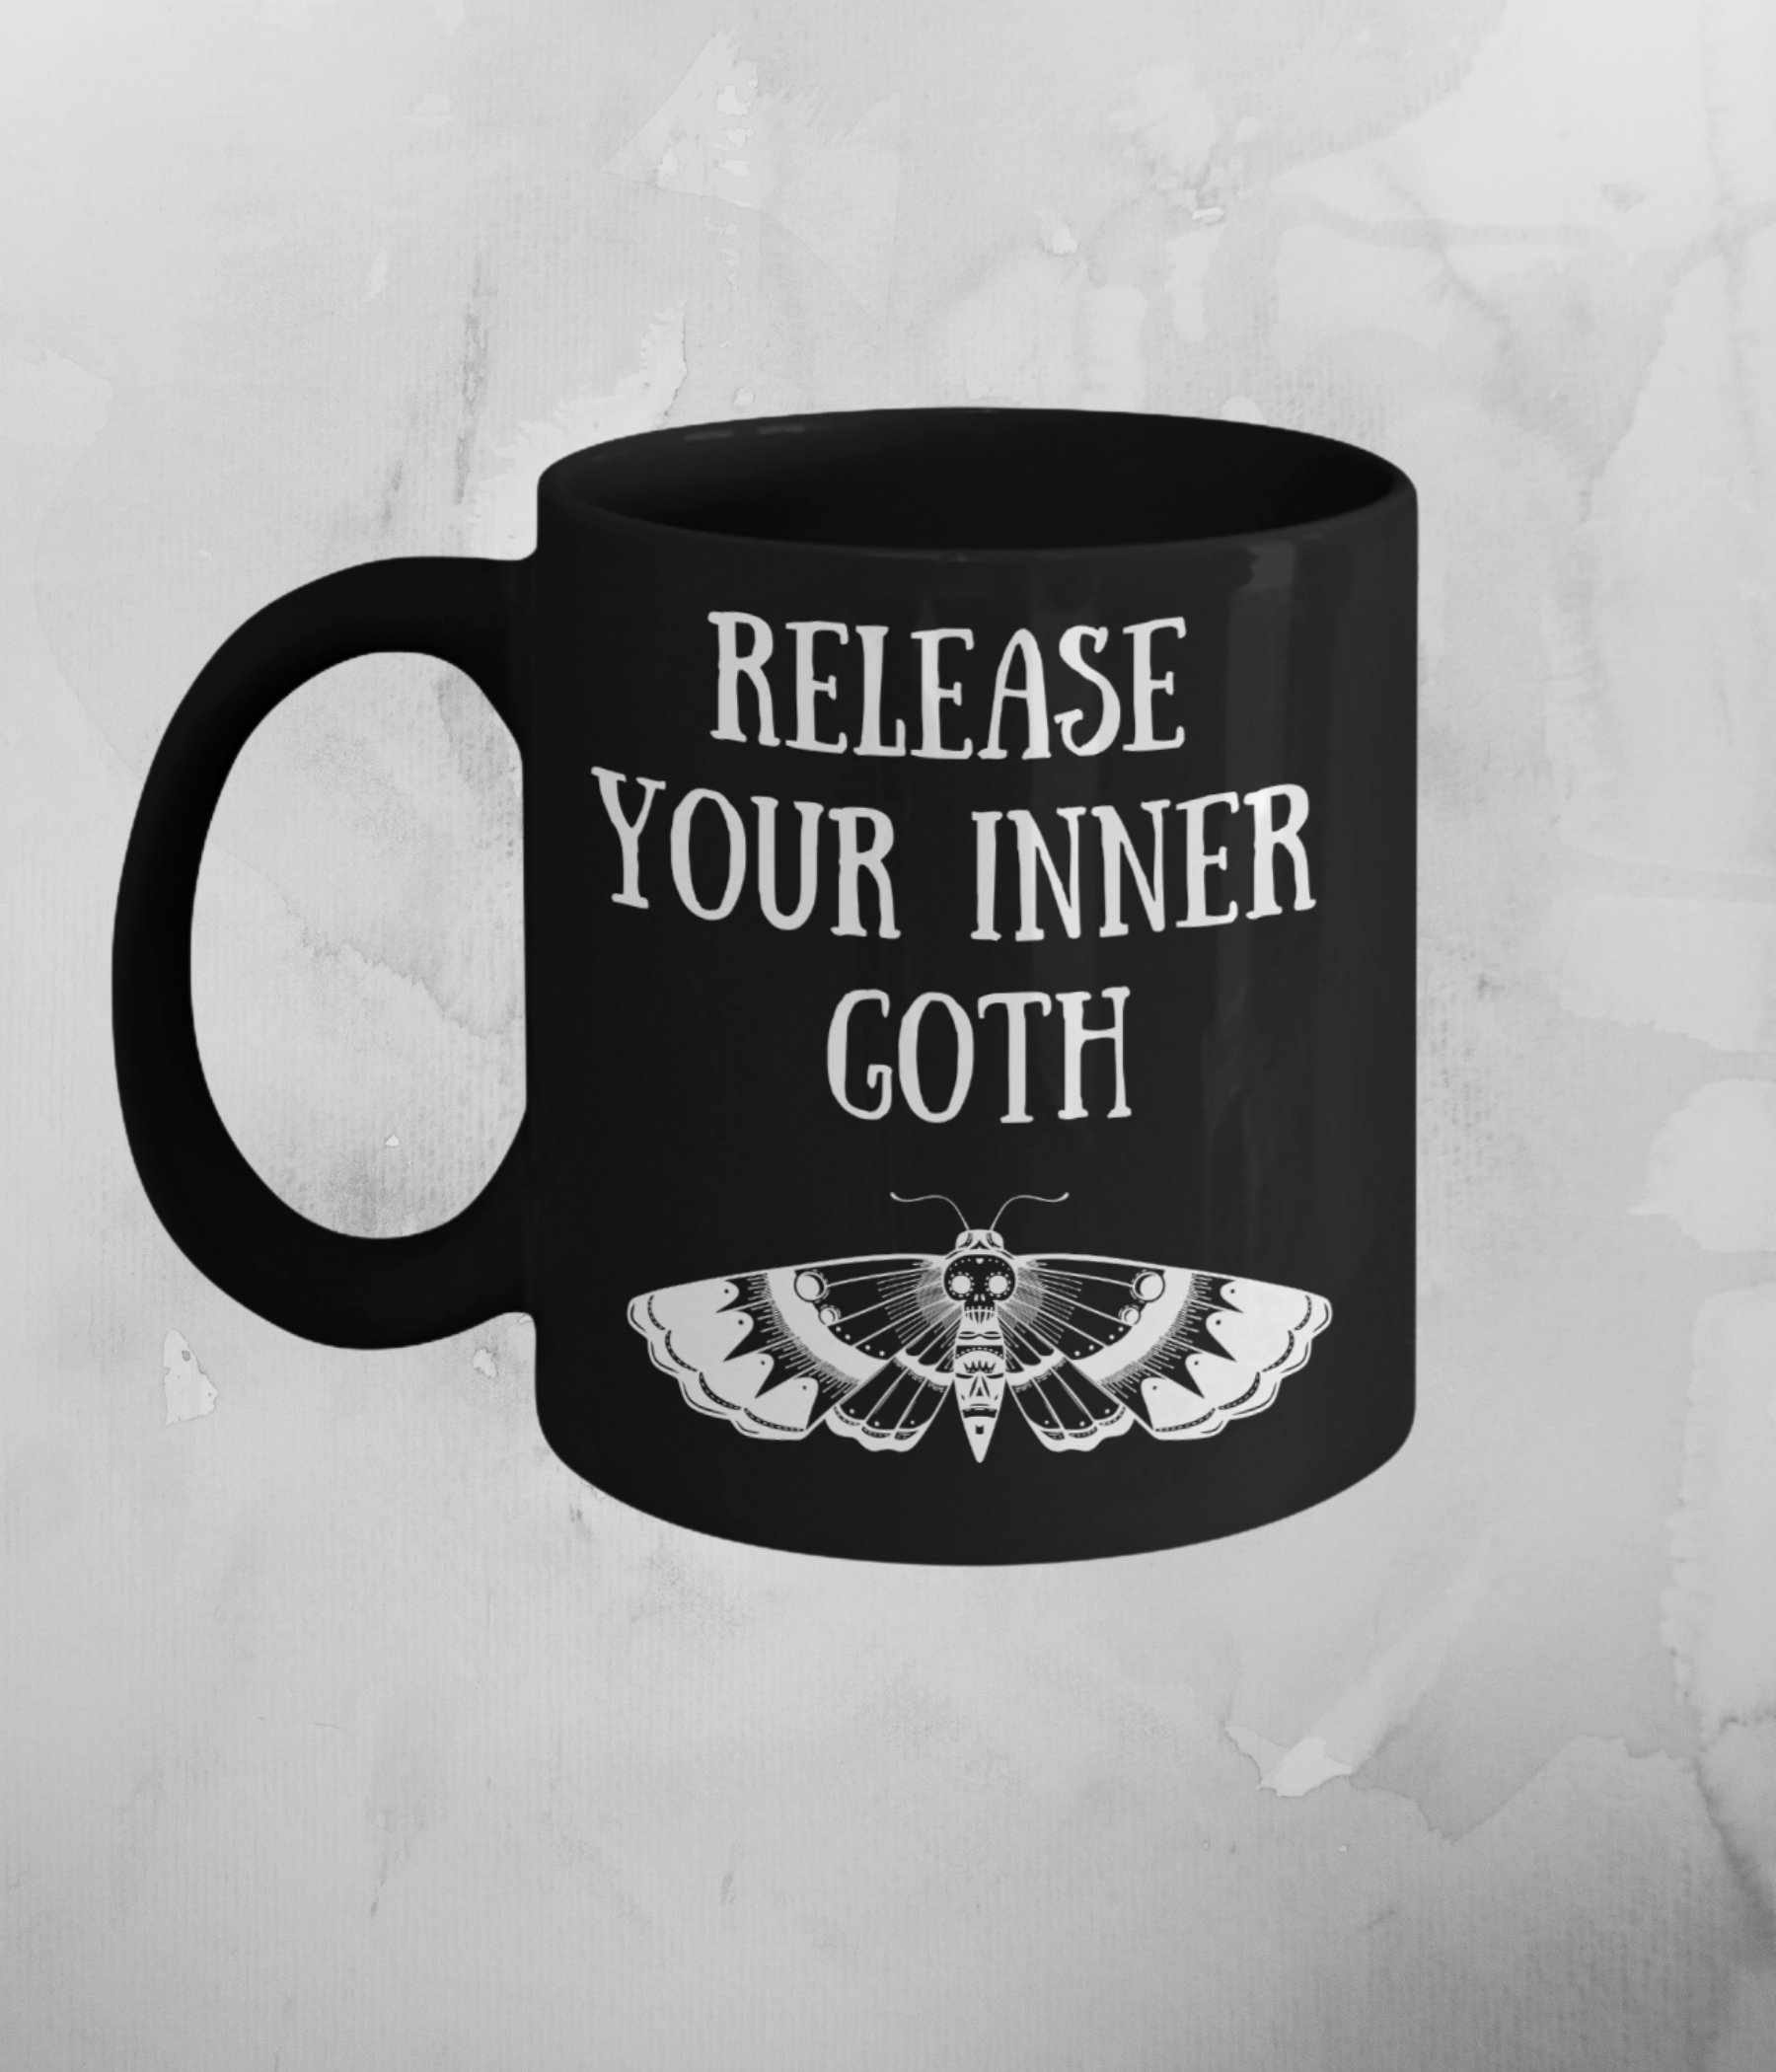 Witchy Coffee Cups Gothic Coffee Mugs Coffee Mugs Coffee Cups Witchy Coffee Mugs Gothic Coffee Cups